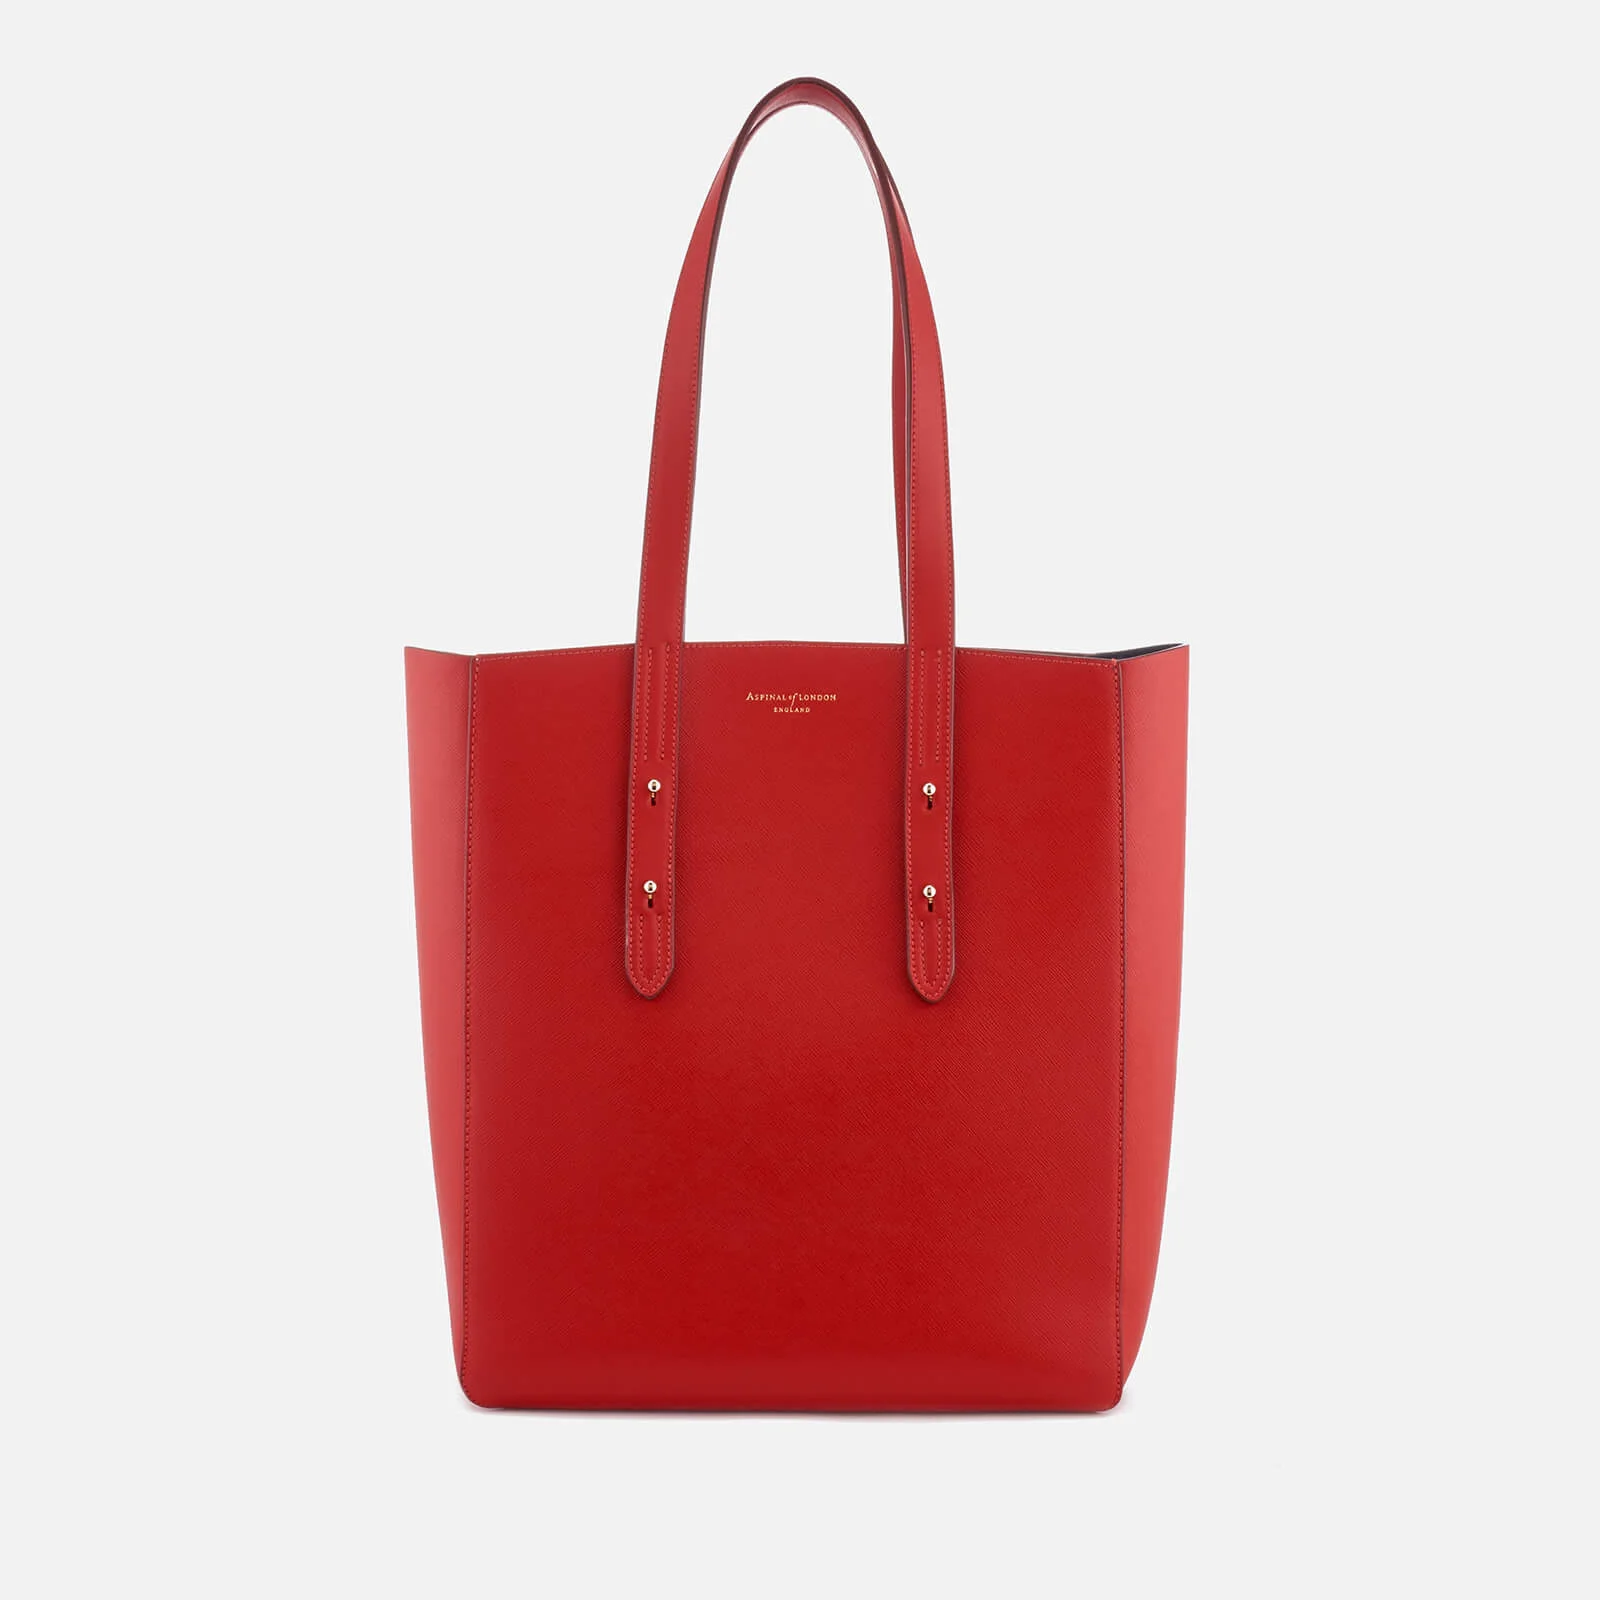 Aspinal of London Women's Essential Tote Bag - Scarlet Image 1